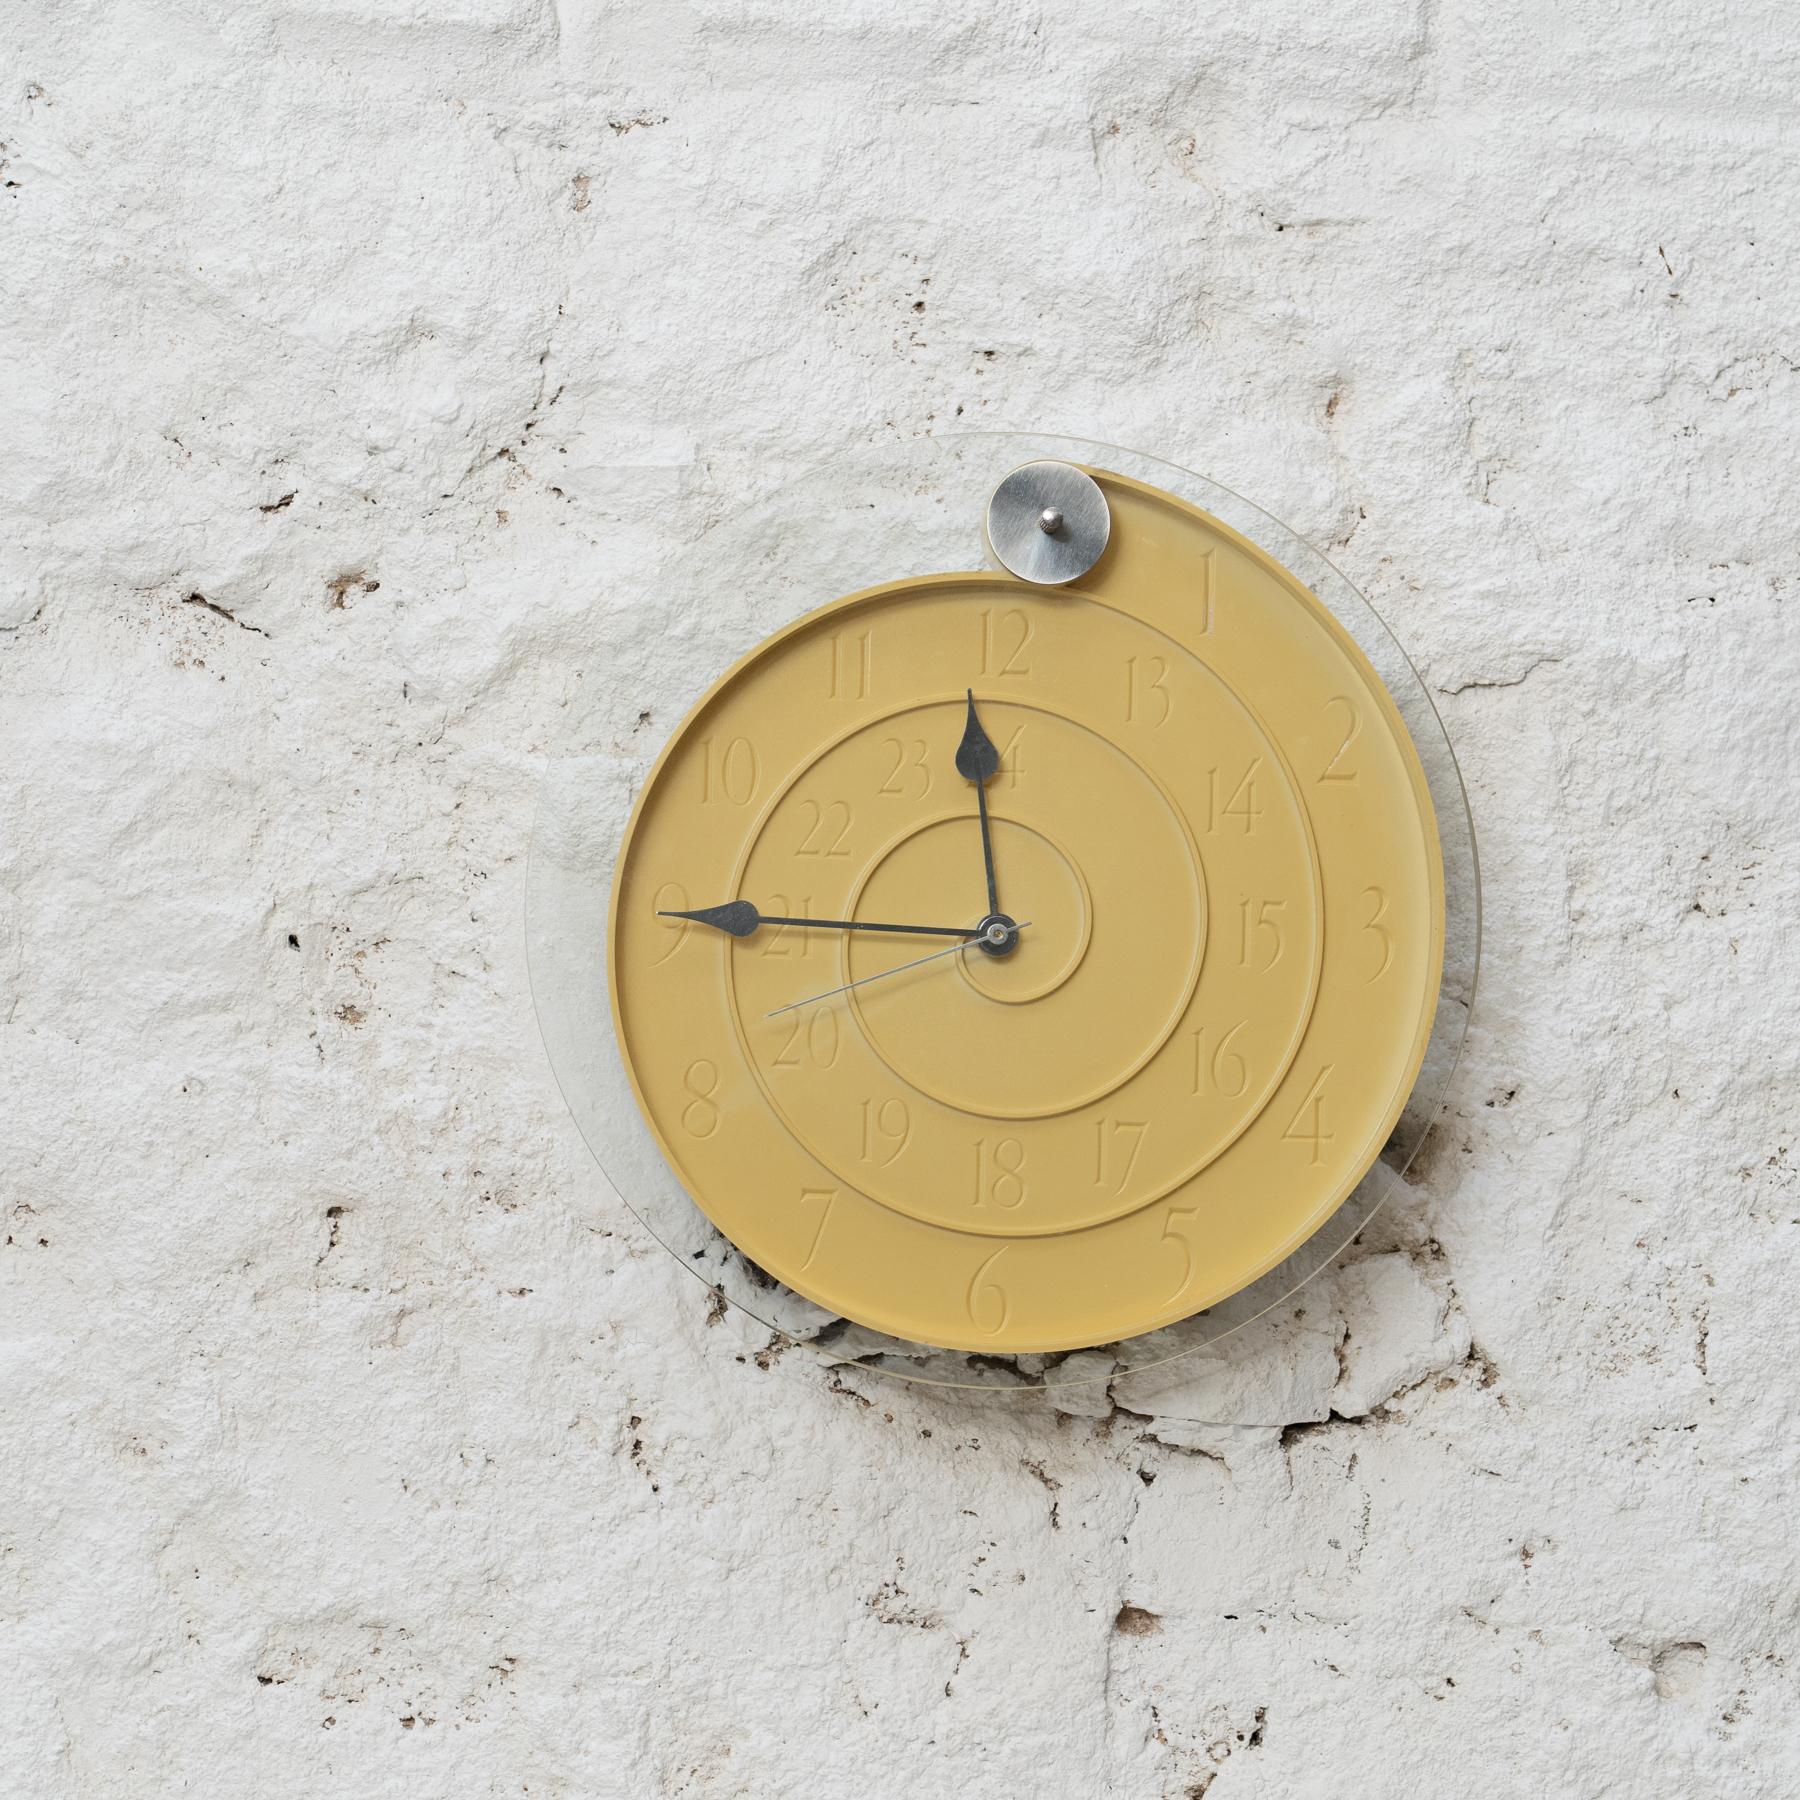     Designer: Oscar Tusquets
    Manufacturer: Mobles 114, Spain
    Year: circa 1996
    Materials: Yellow Mustard Plastic and Glass

Original Condition  Minimalist Charm  Spiraled Sophistication

Step into the world of unconventional timekeeping